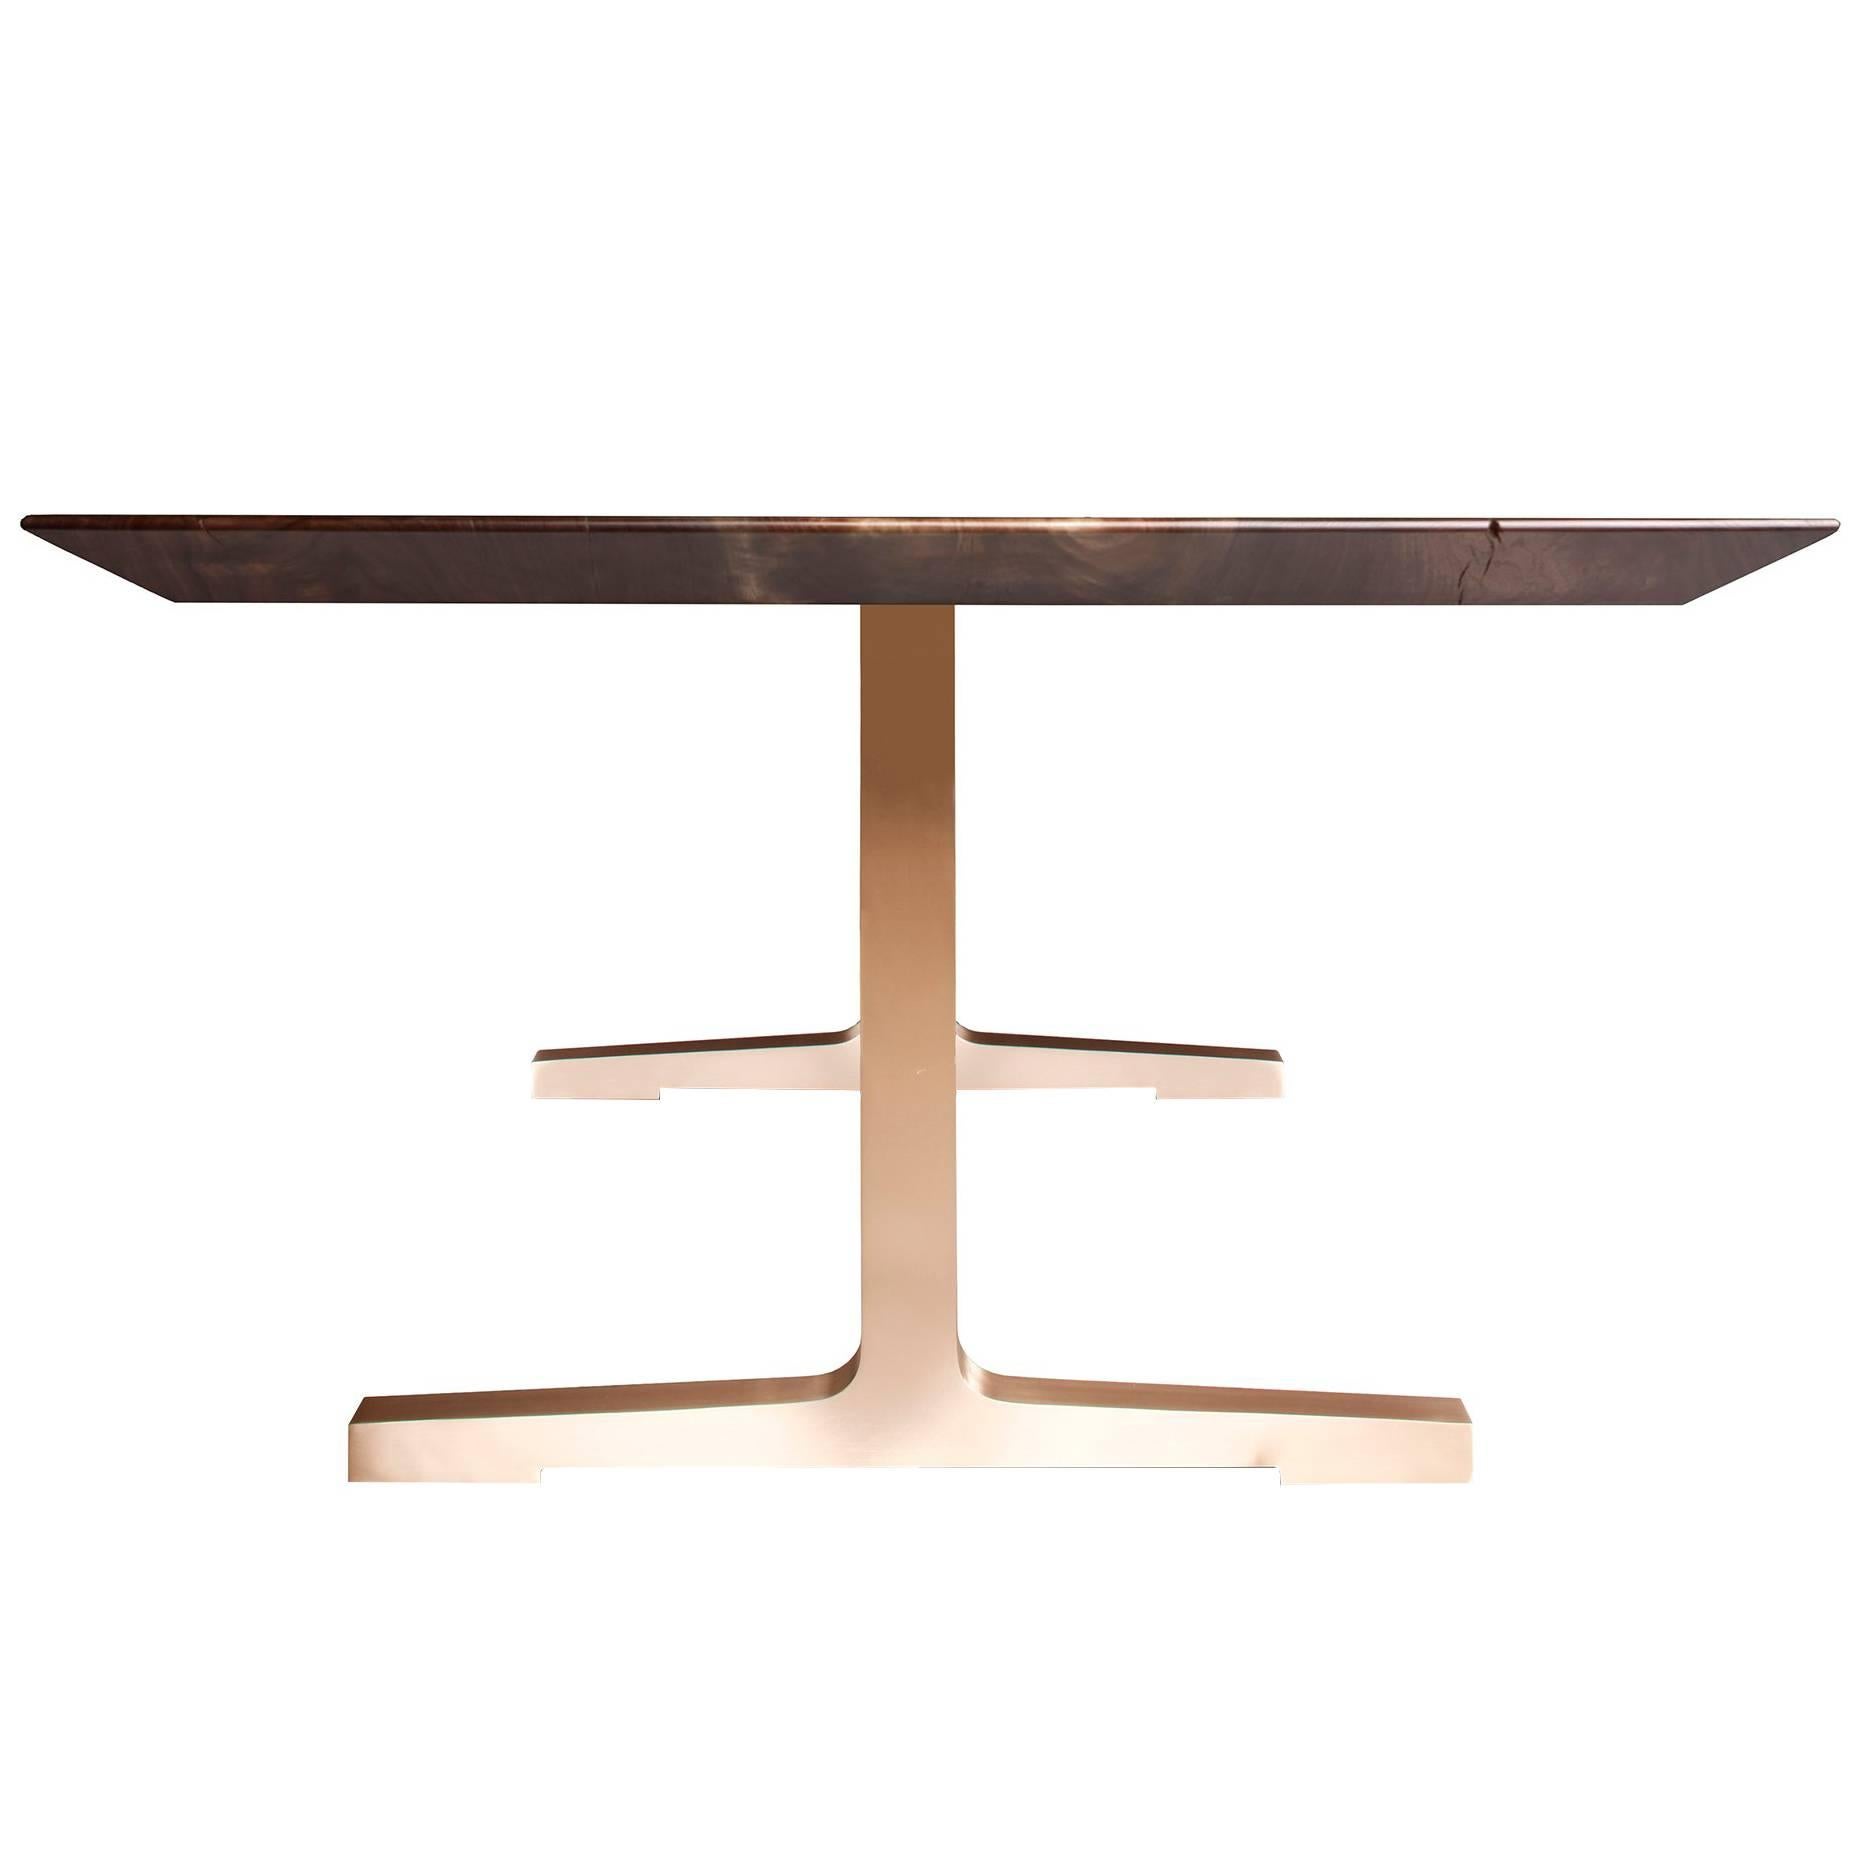 Soho Slim Bevel Dining Table with Bronze Legs by Studio Roeper